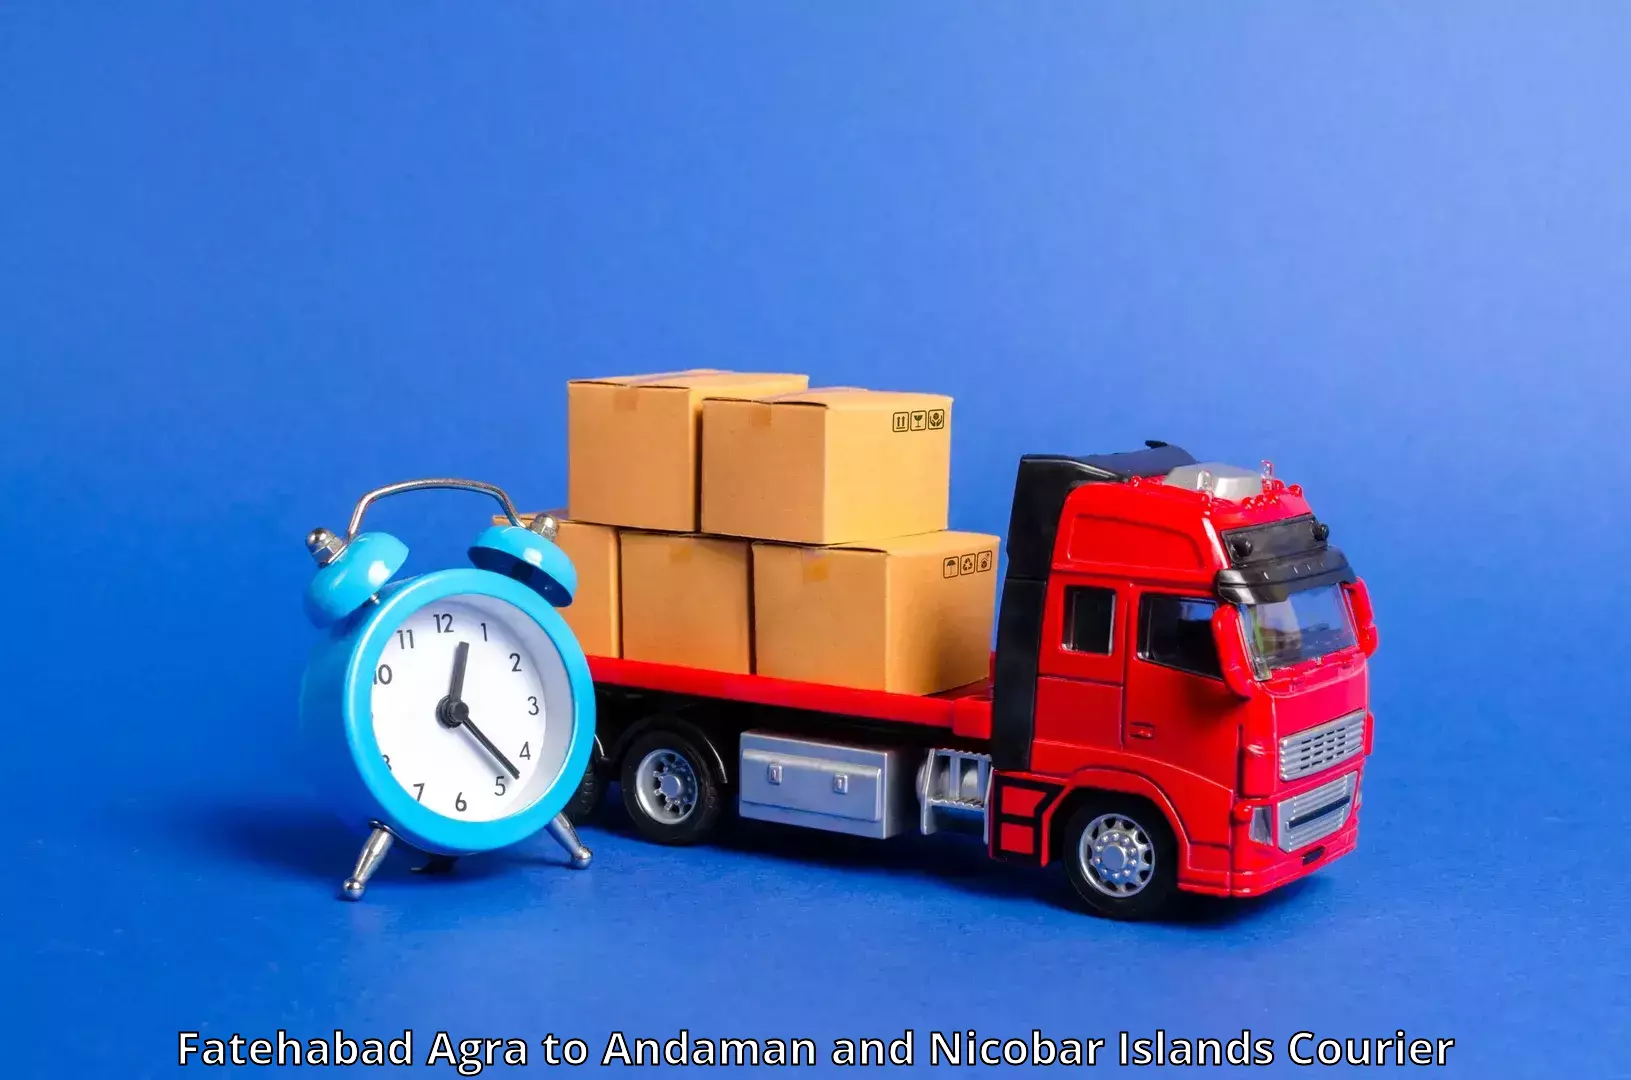 24/7 courier service in Fatehabad Agra to Nicobar